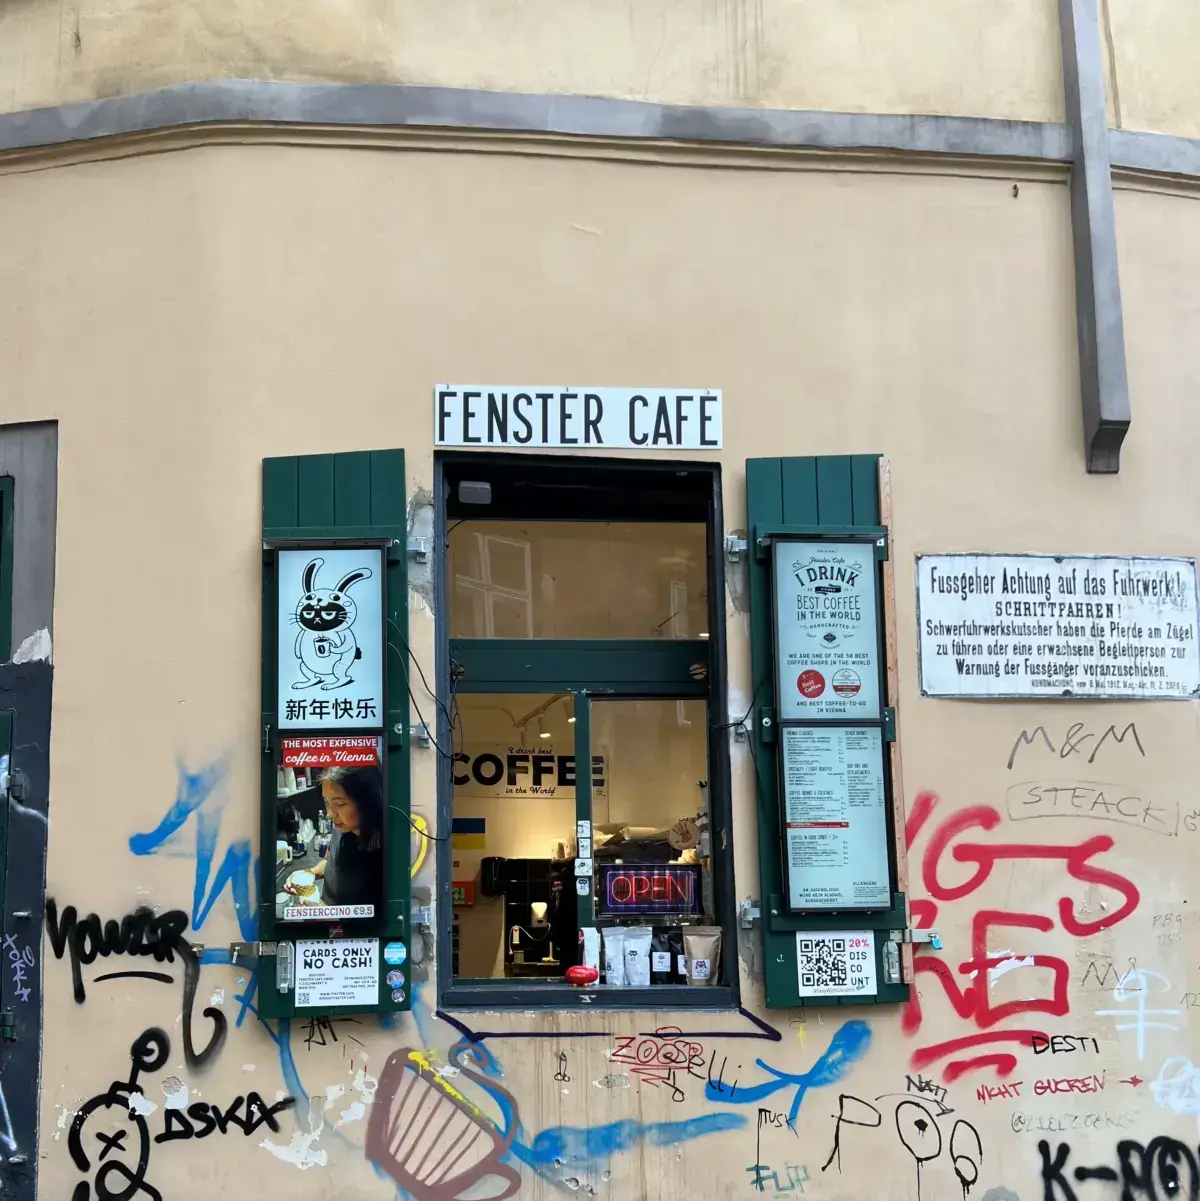 The window at Fenster. It has wooden shutters, and a sliding window. The menu is attached to the shutter. Graffiti tags cover the surrounding walls.